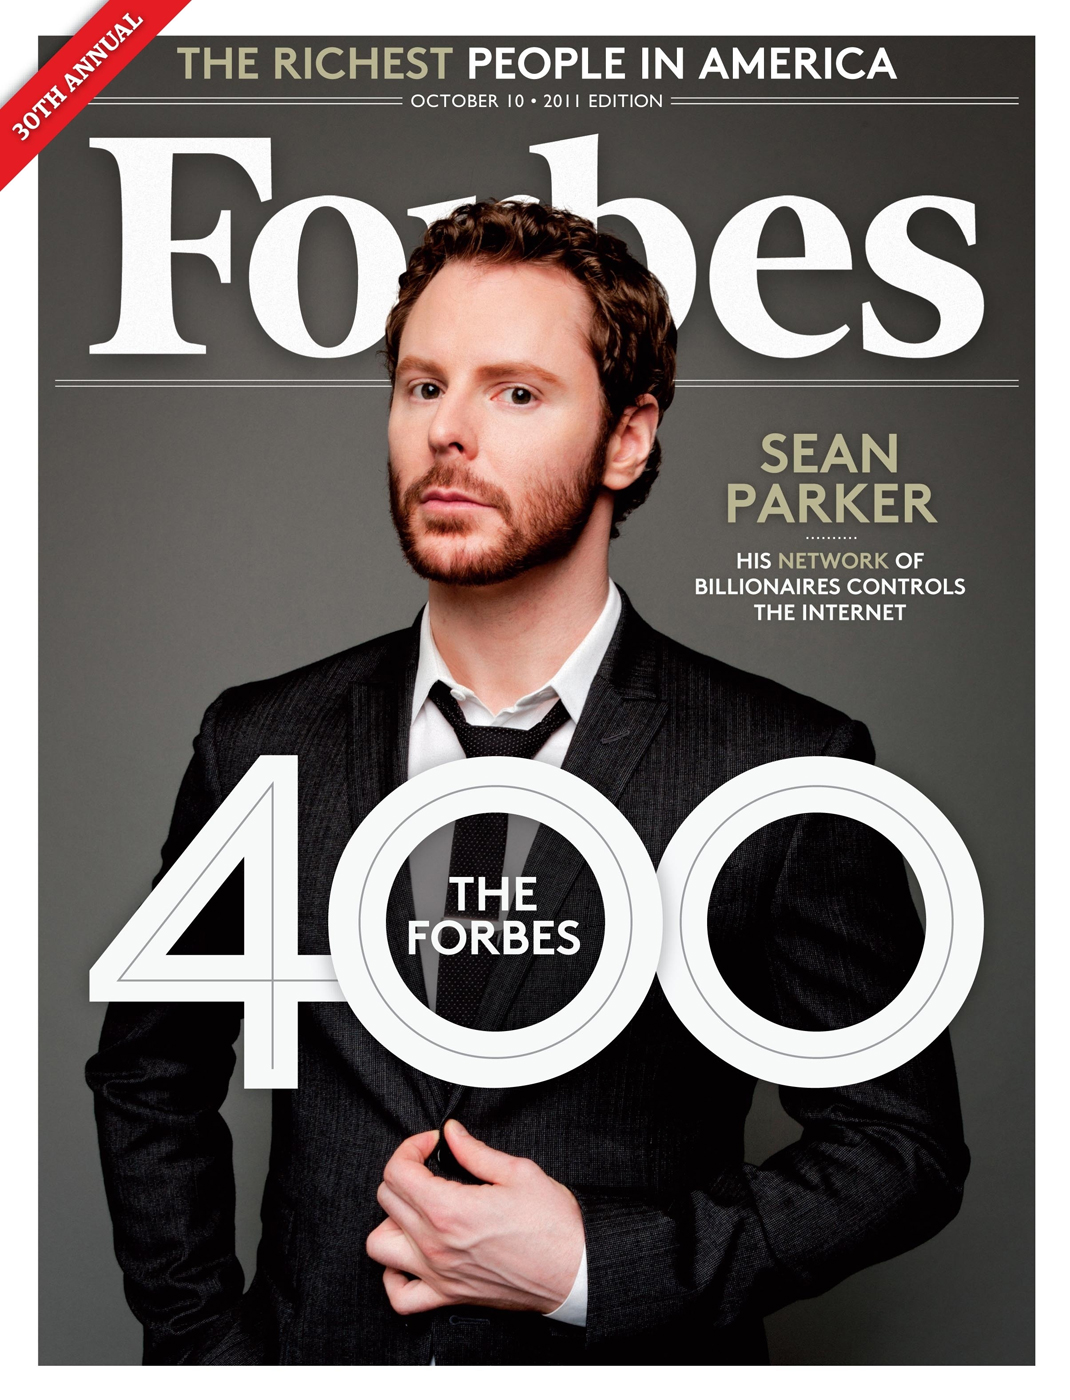 Forbes 400